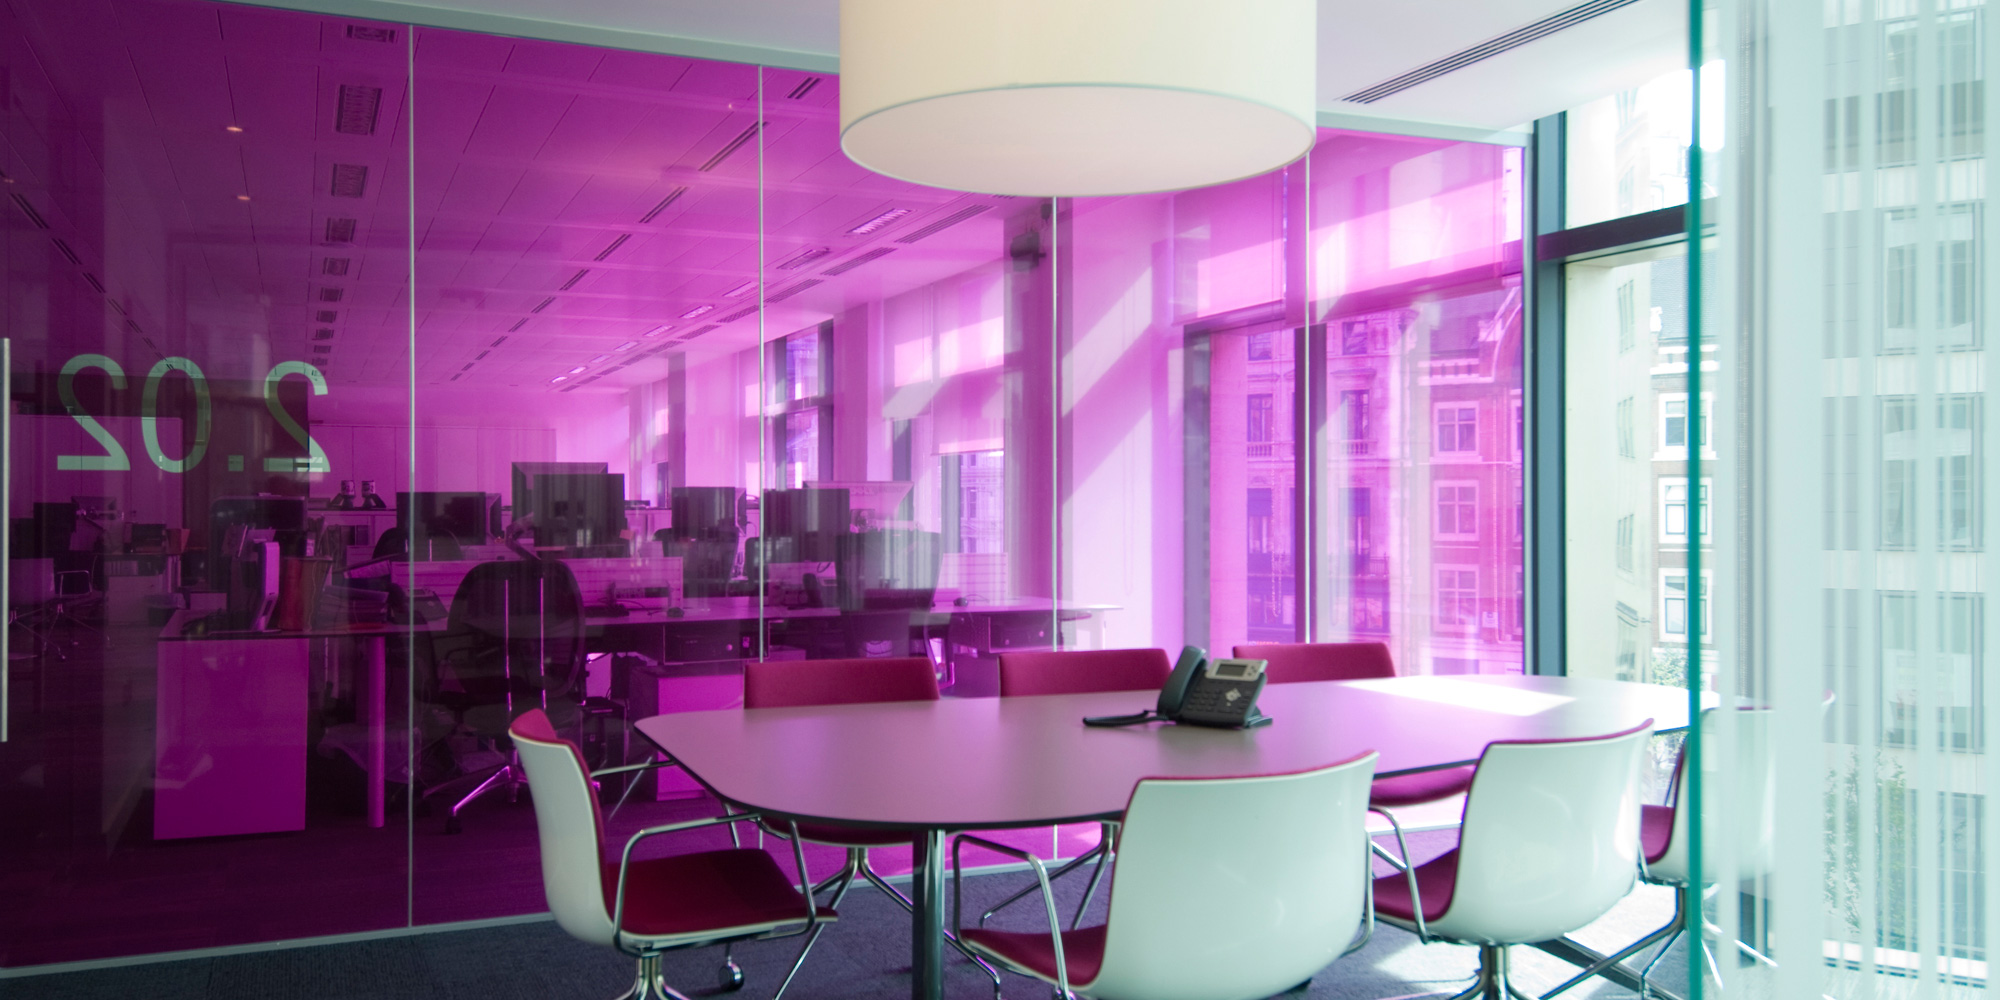 Workplace analysis and space planning - meeting room interior with coloured glass film